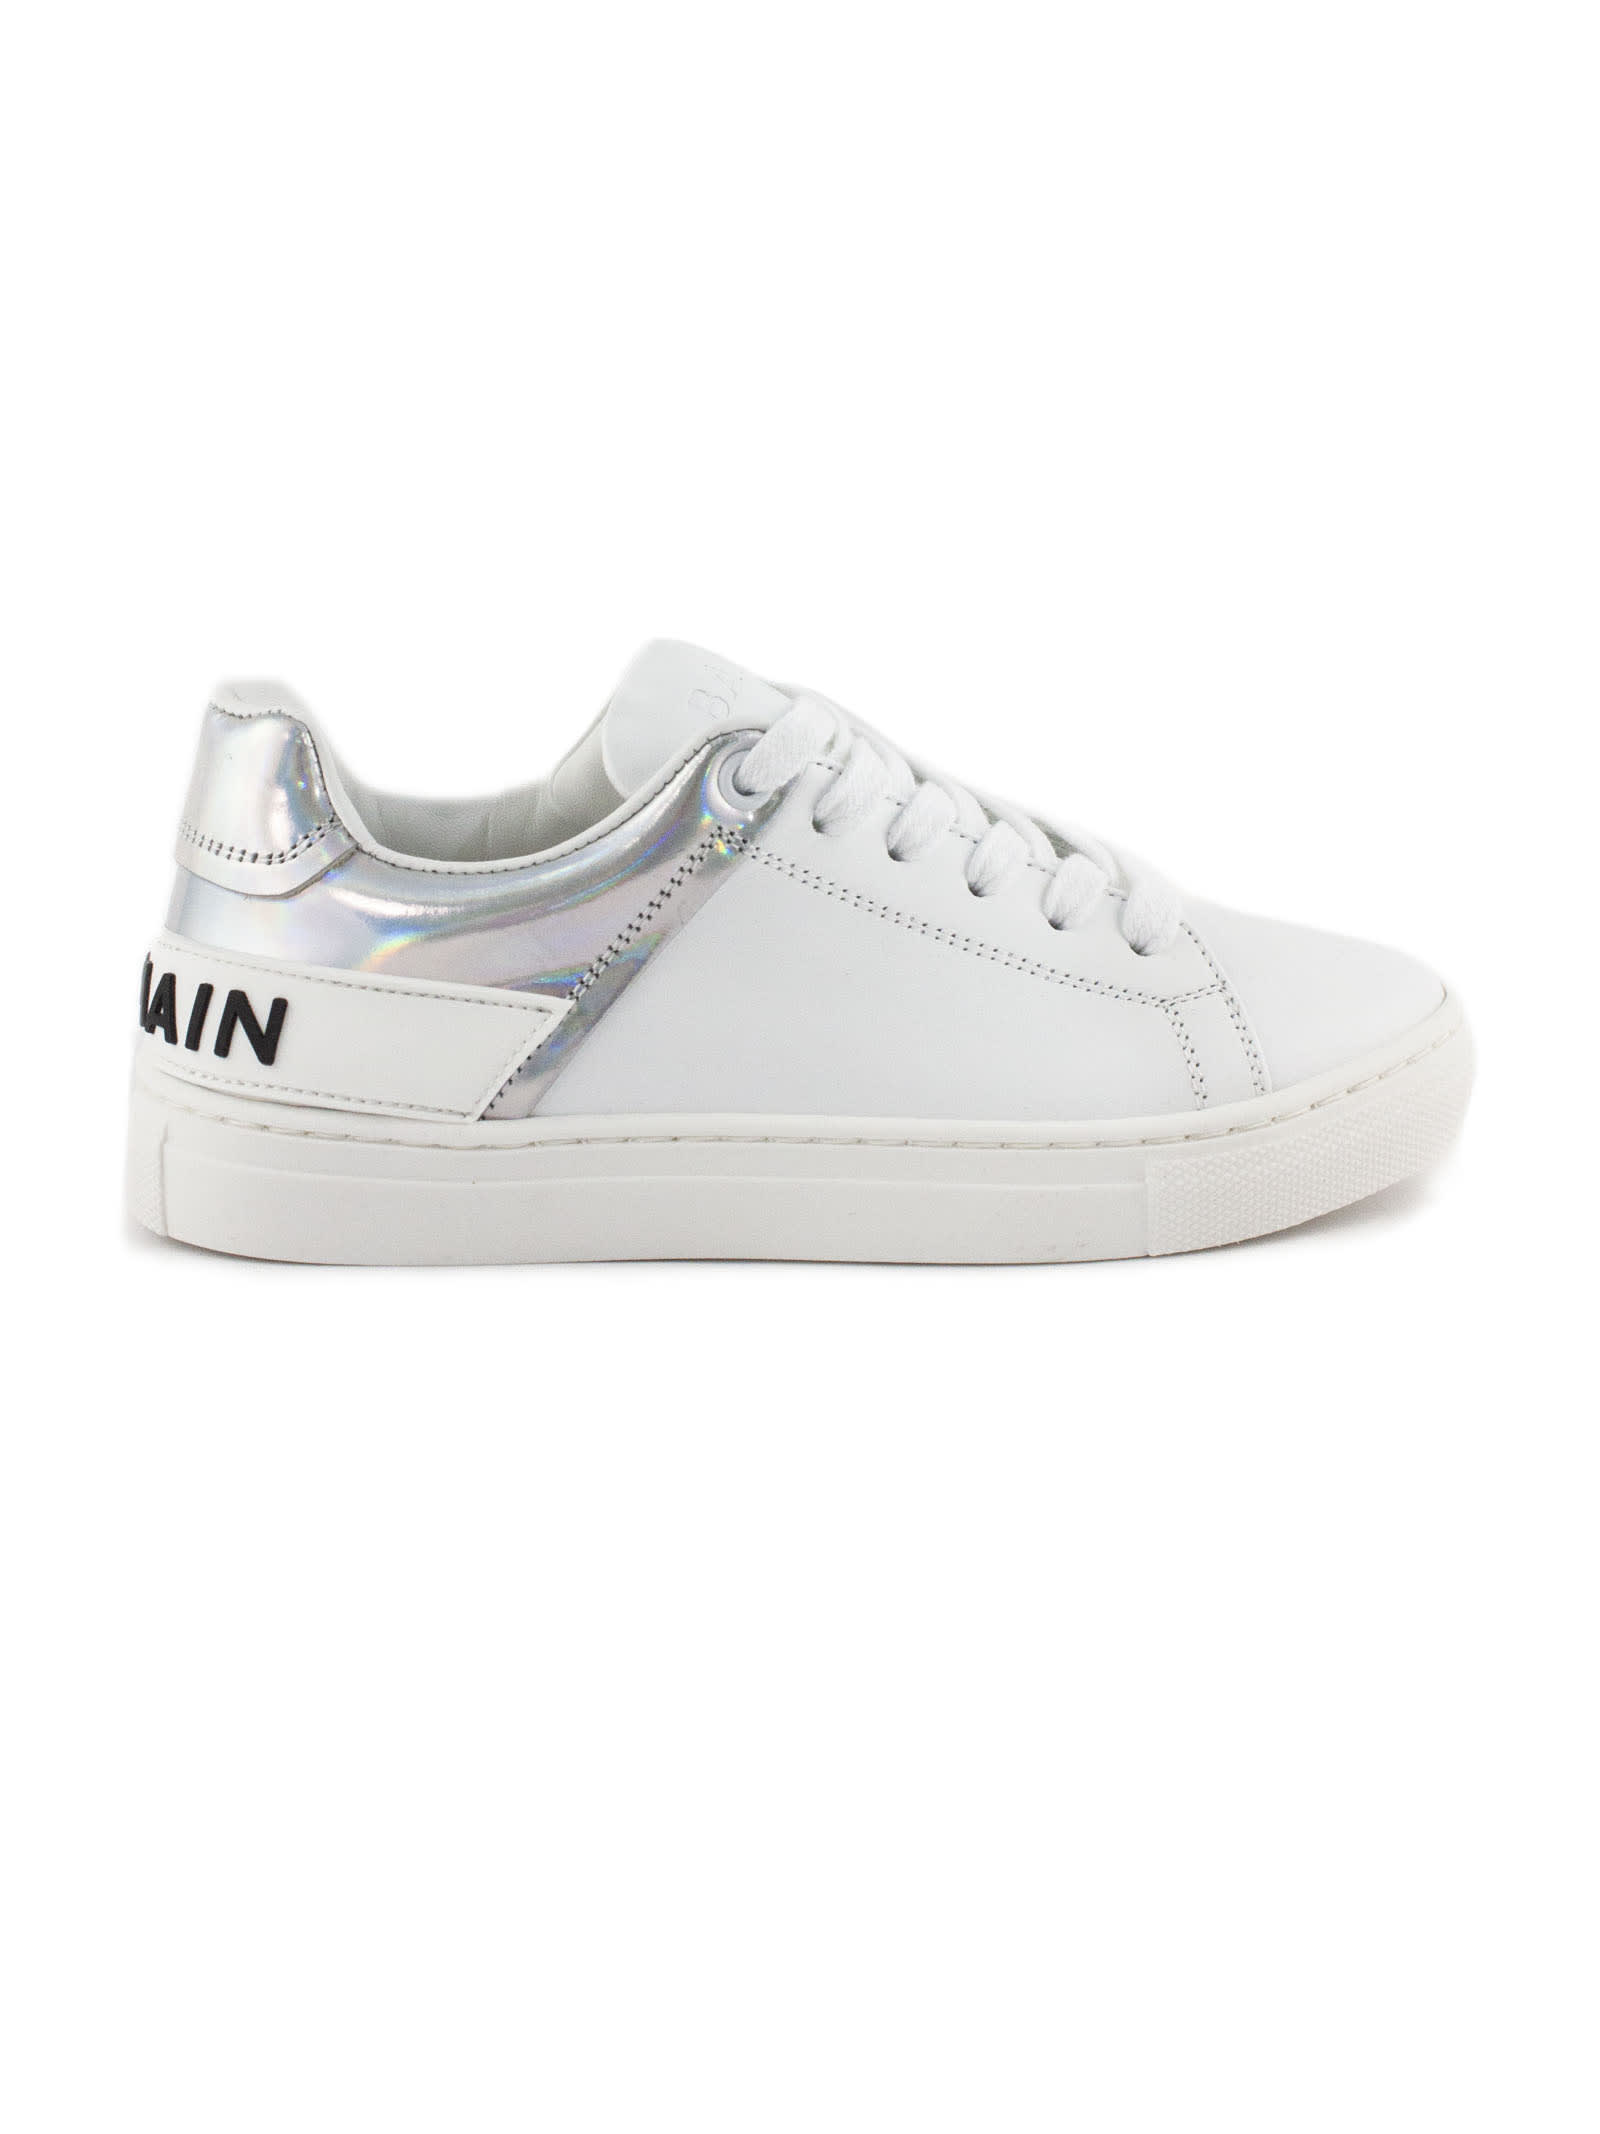 Balmain White Leather Low-top Sneakers